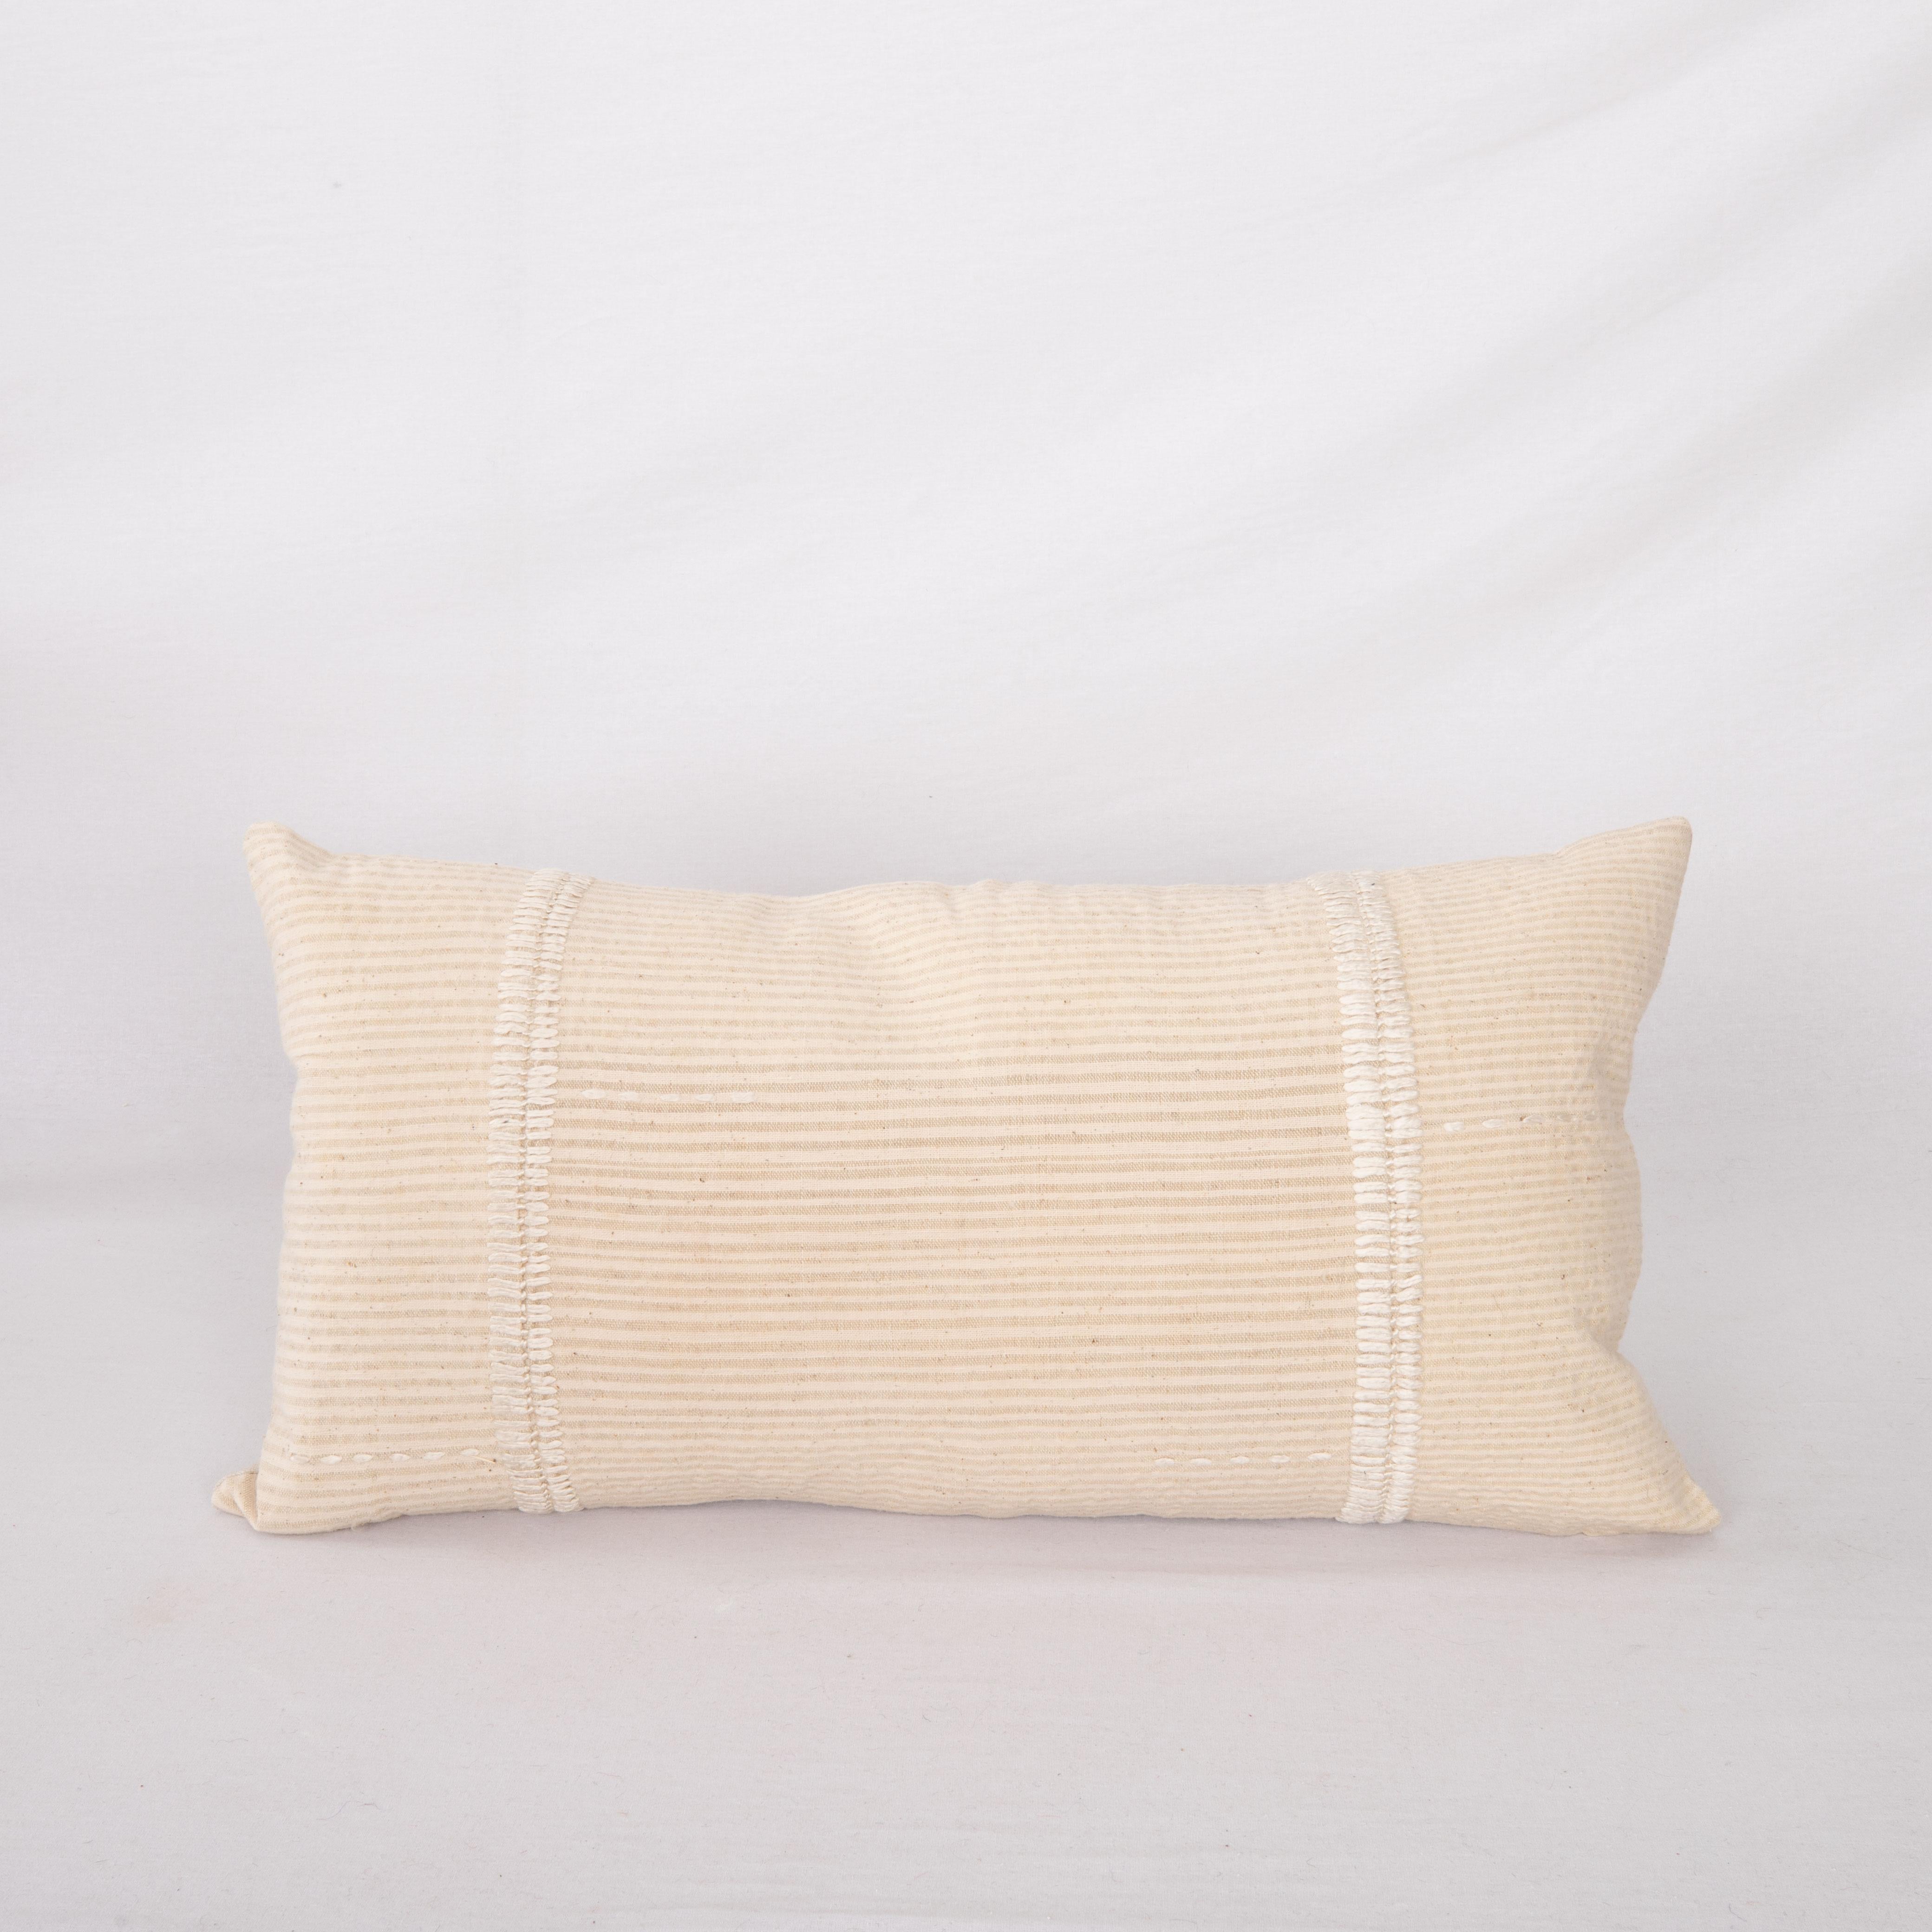 This pillow case is made from a vintage Anatolian Cotton Cover. Hand done silk stitching on it is our addition to the piece to give it a fine detail.

It does not come with inserts.
linen in the back.
Zipper closure.
Dry cleaning is reccommended.
